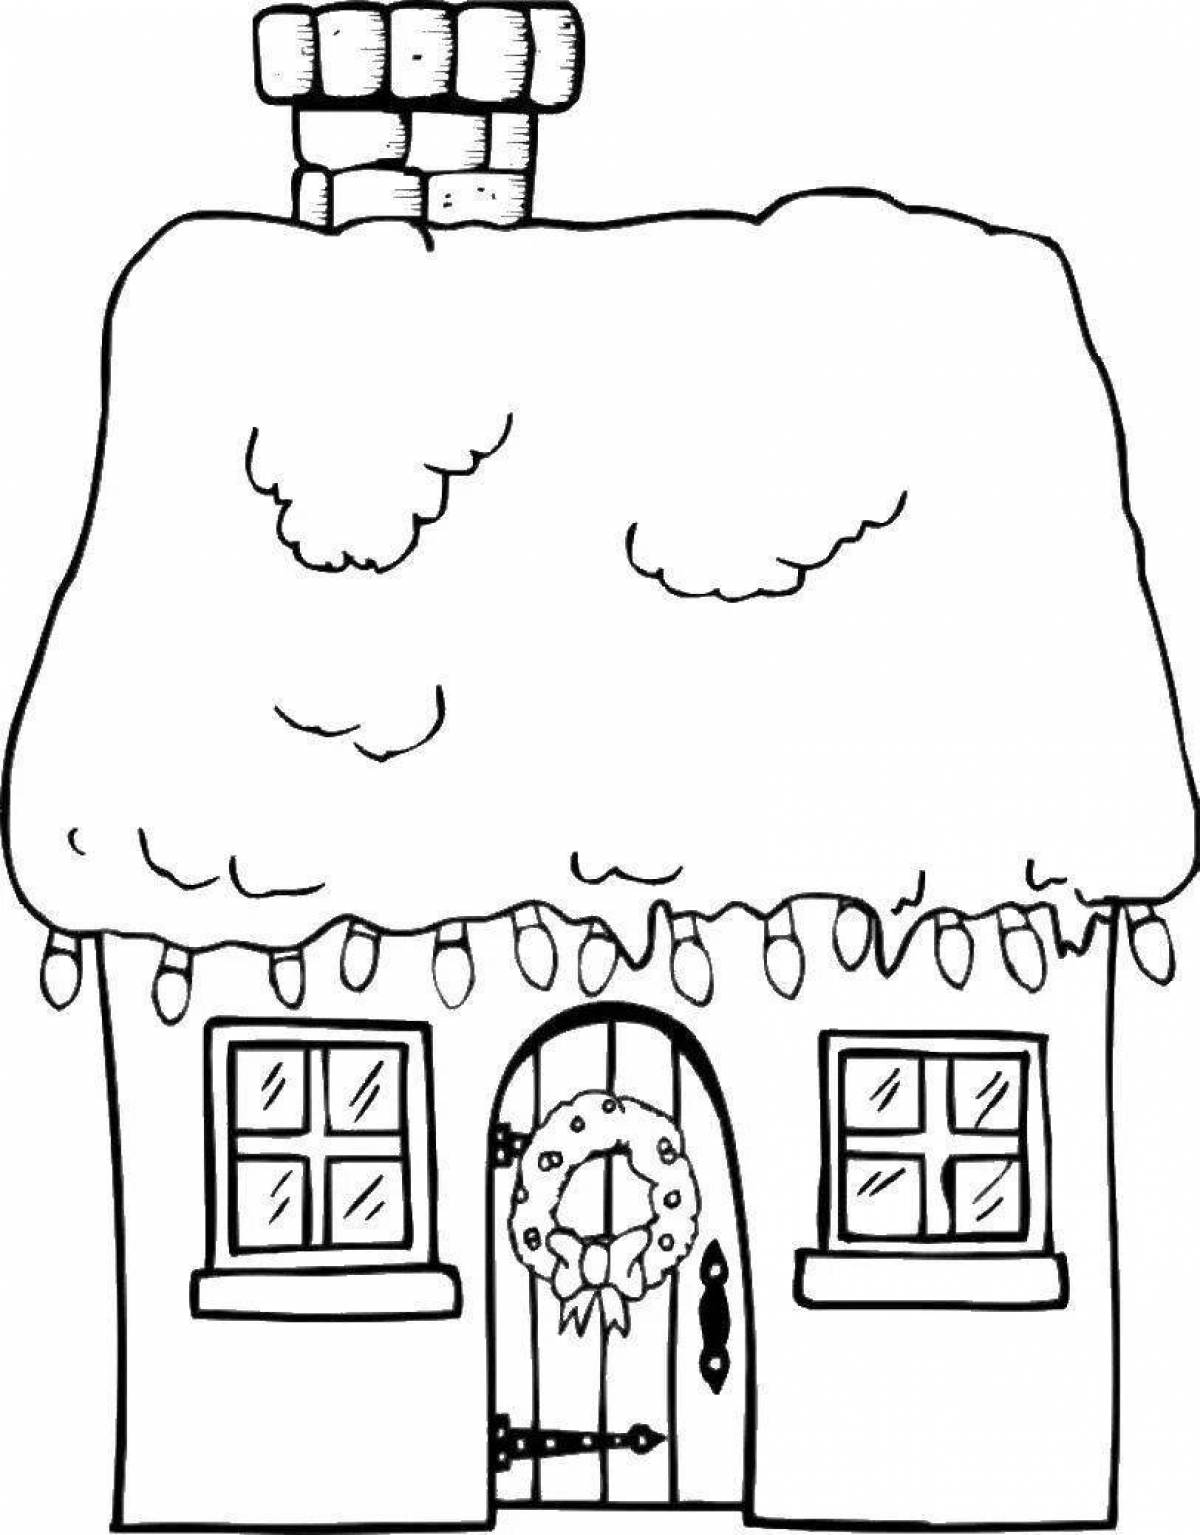 Majestic winter hut coloring page